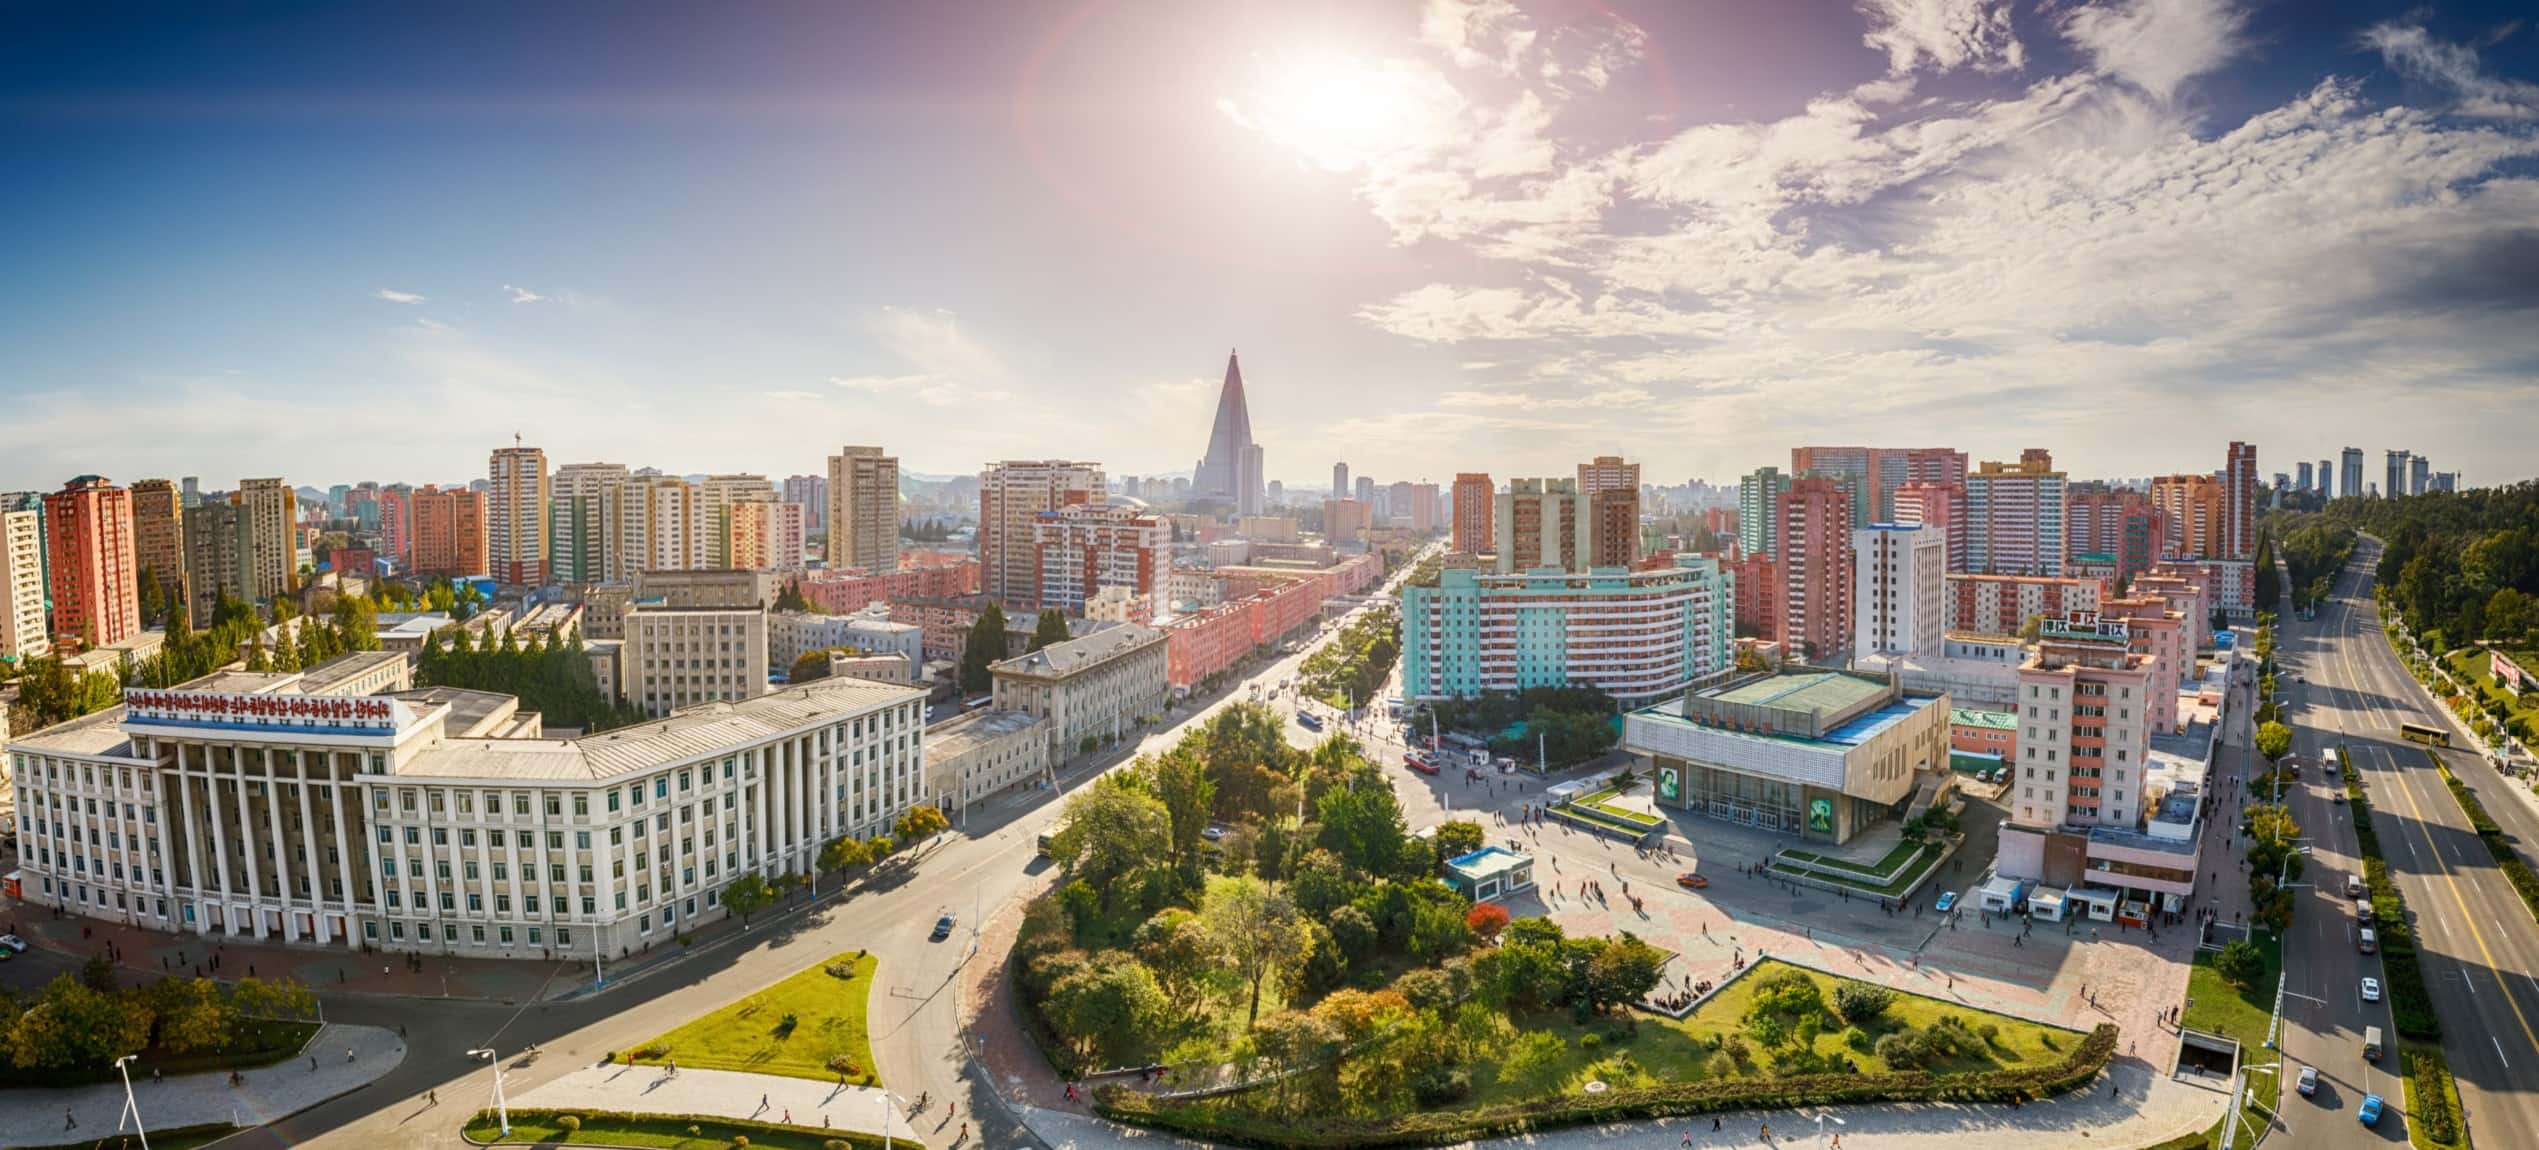 14-facts-about-north-korea-economy